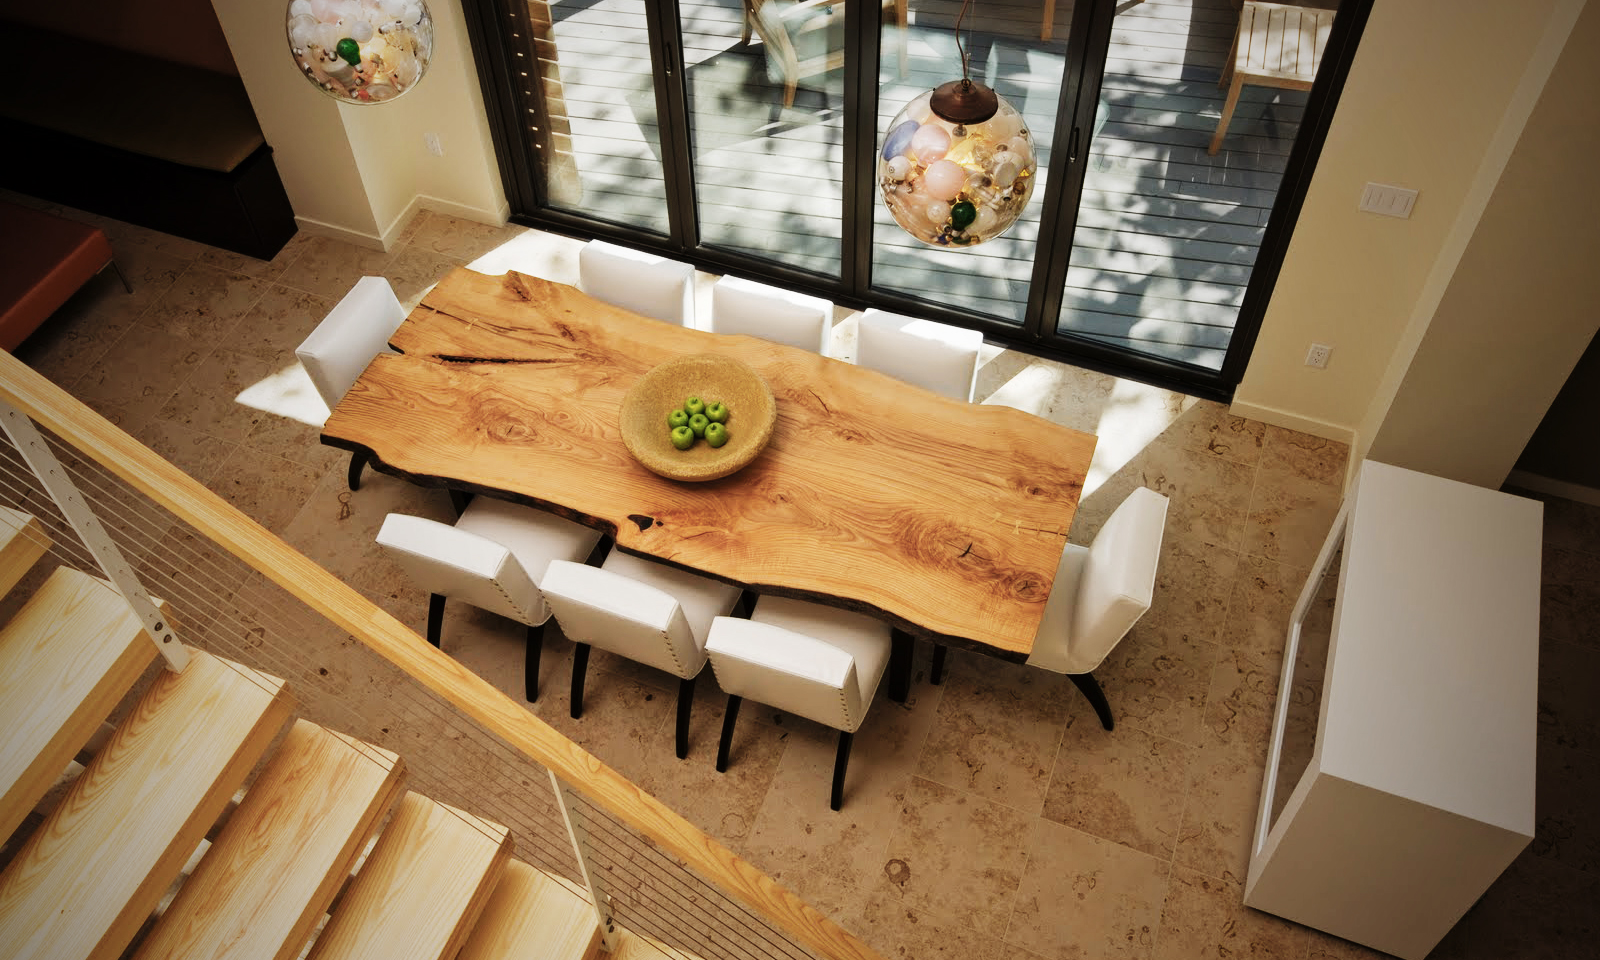 Rdining-room-table-reclaimed-wood-beebeegrace-wood-tables-white-chairs-83368